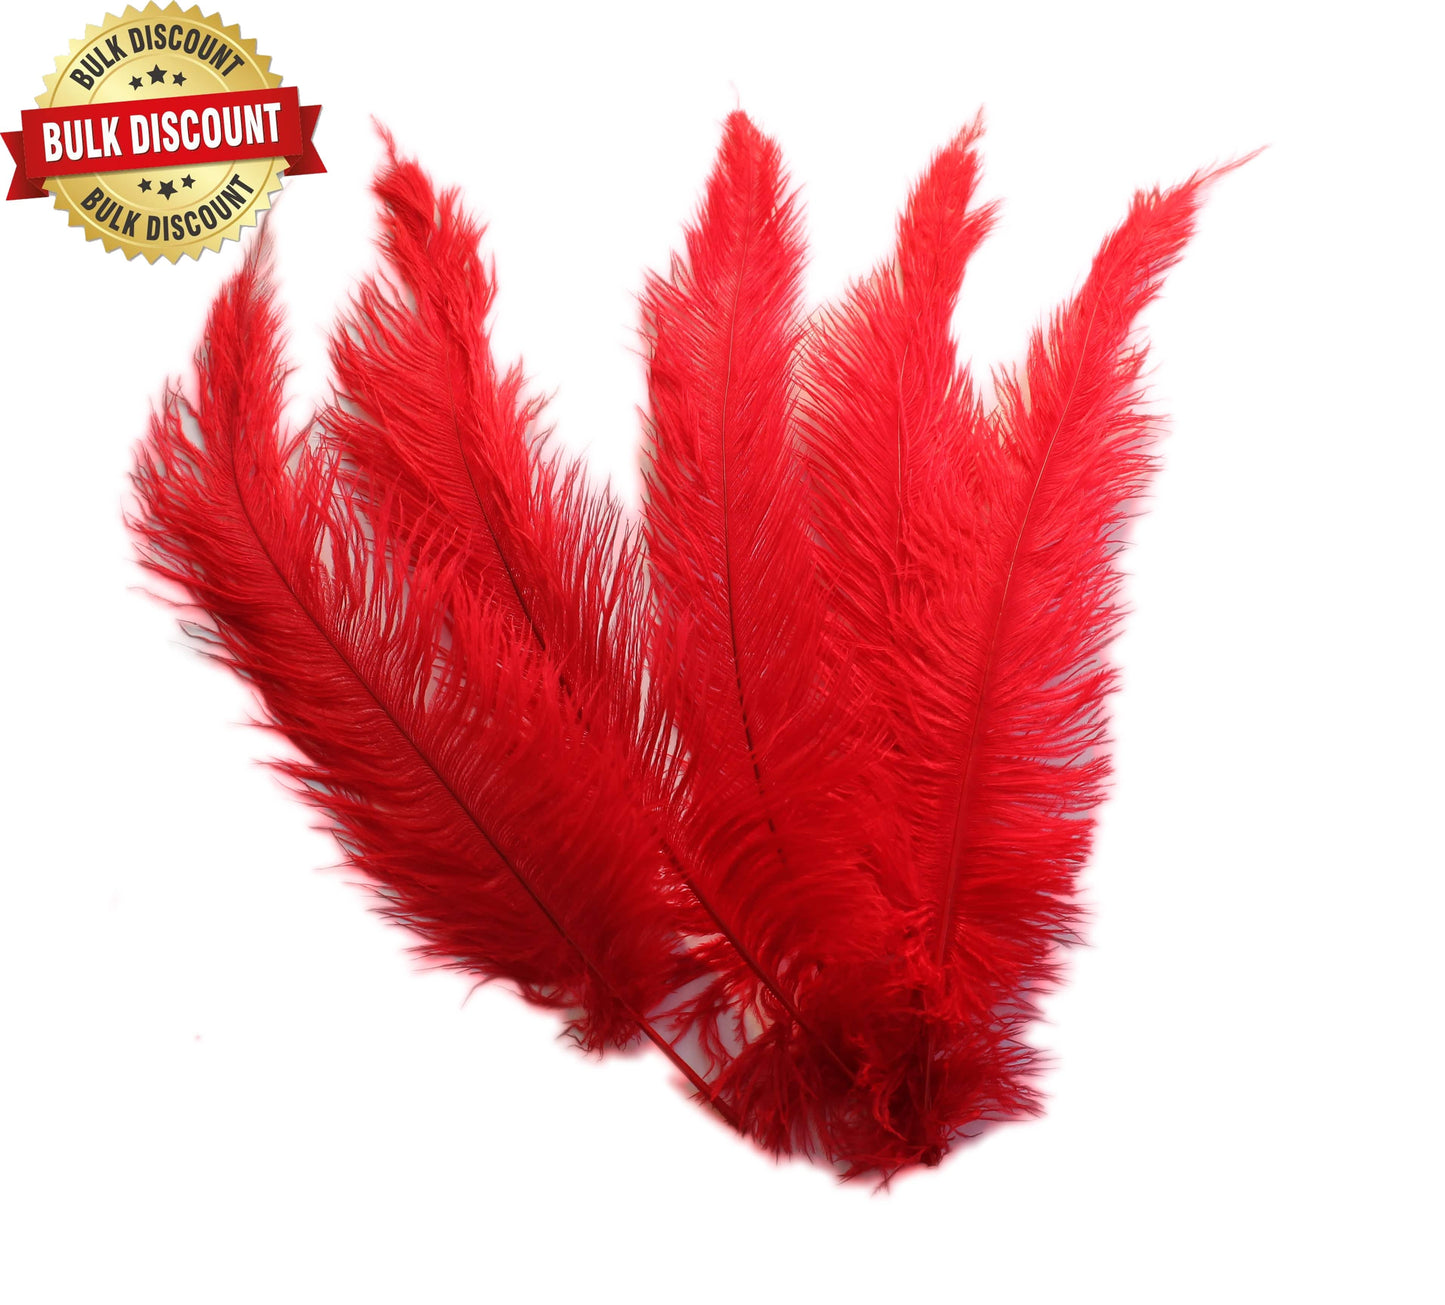 BULK 1/4lb Ostrich Feather Spad Plumes 12-16" (Red) - Buy Ostrich Feathers